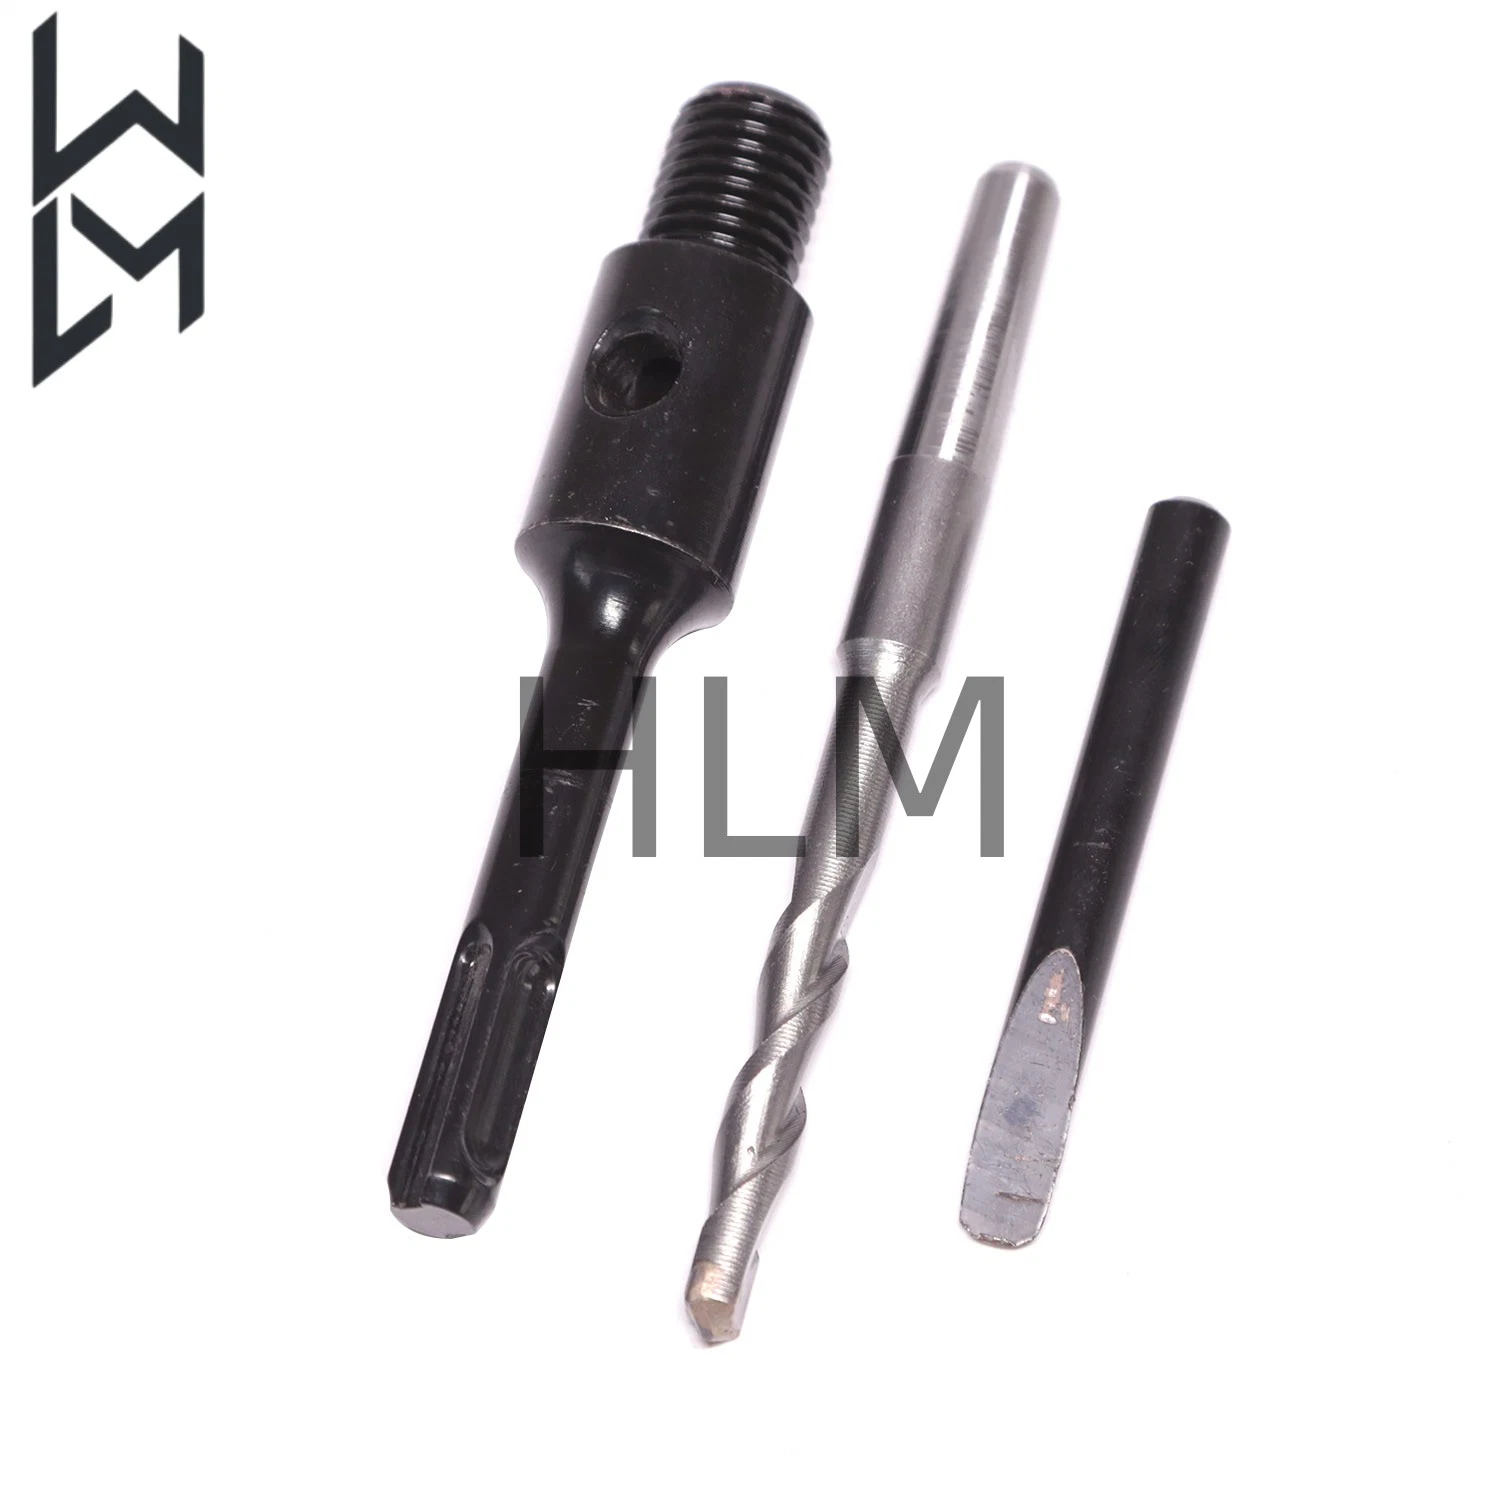 Grinding Stainless Steel Special Cobalt-Containing Twist Drill Bit Set Metal Drilling